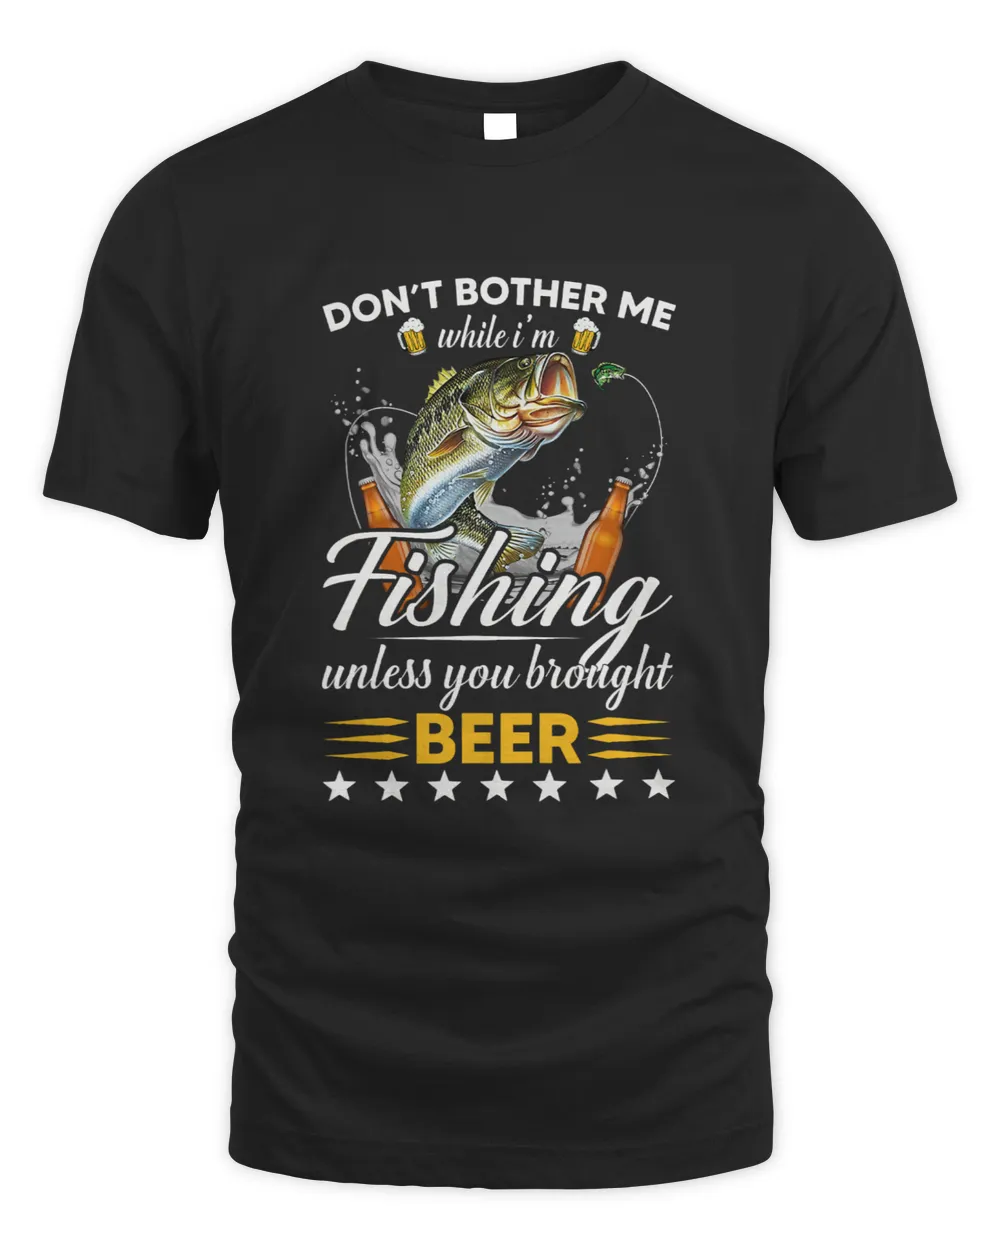 Beer Mens Dont Bother Me While Im Fishing Unless You Brought Beer